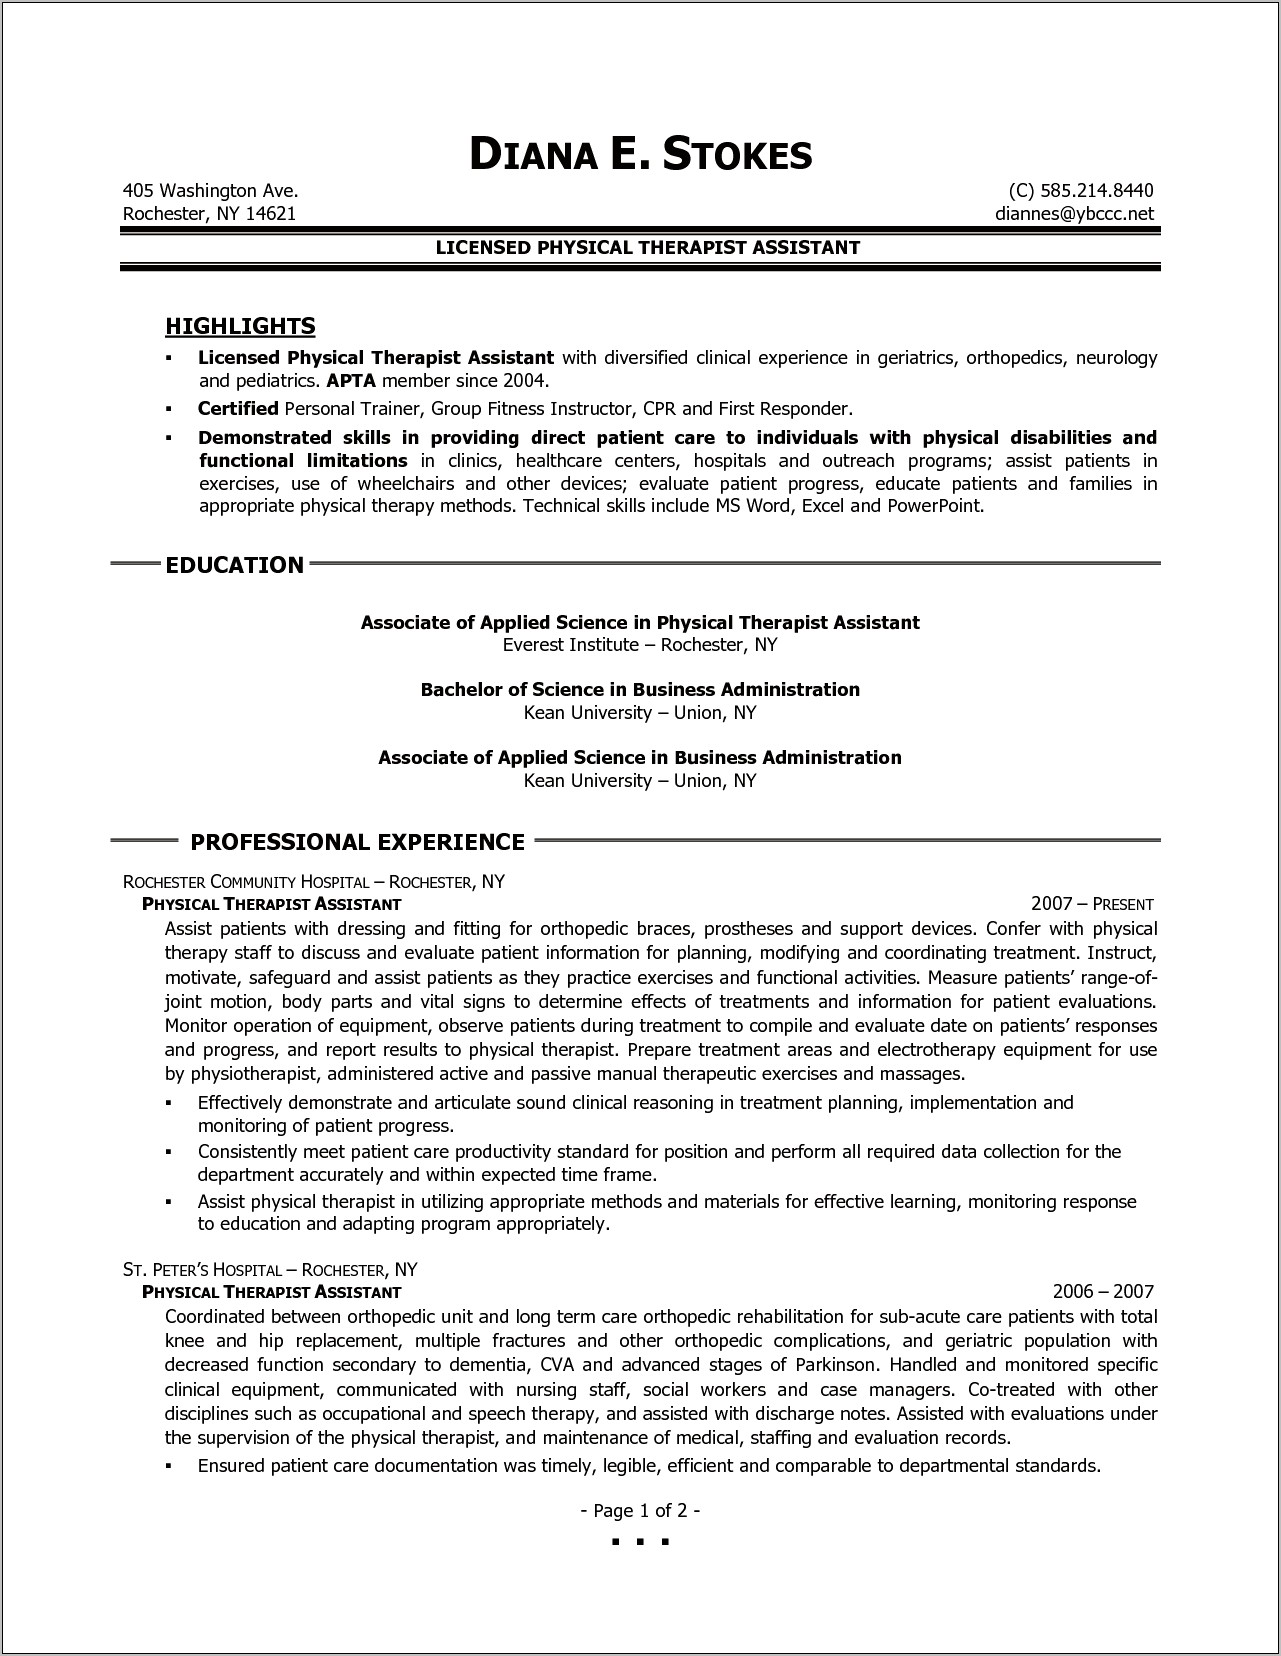 Resume Example Nys Registered Occupational Therapist